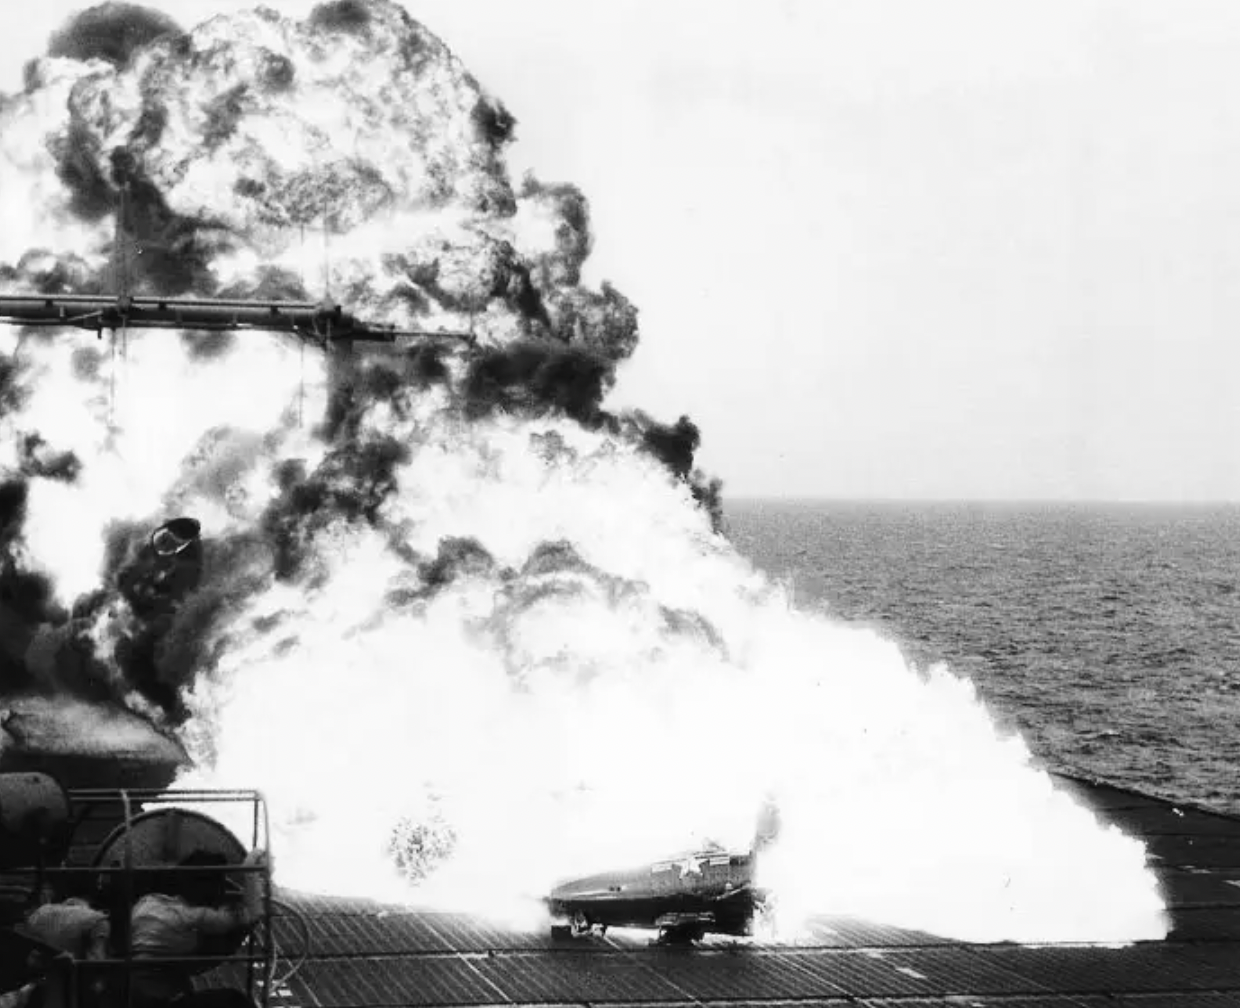 A well-known carrier accident of the 1950s: here, the F9F-5 Panther pilot <a href="https://www.twz.com/41251/the-most-replayed-carrier-crash-in-history-happened-70-years-ago-today">survived a ramp strike</a> and the fiery destruction of his aircraft.